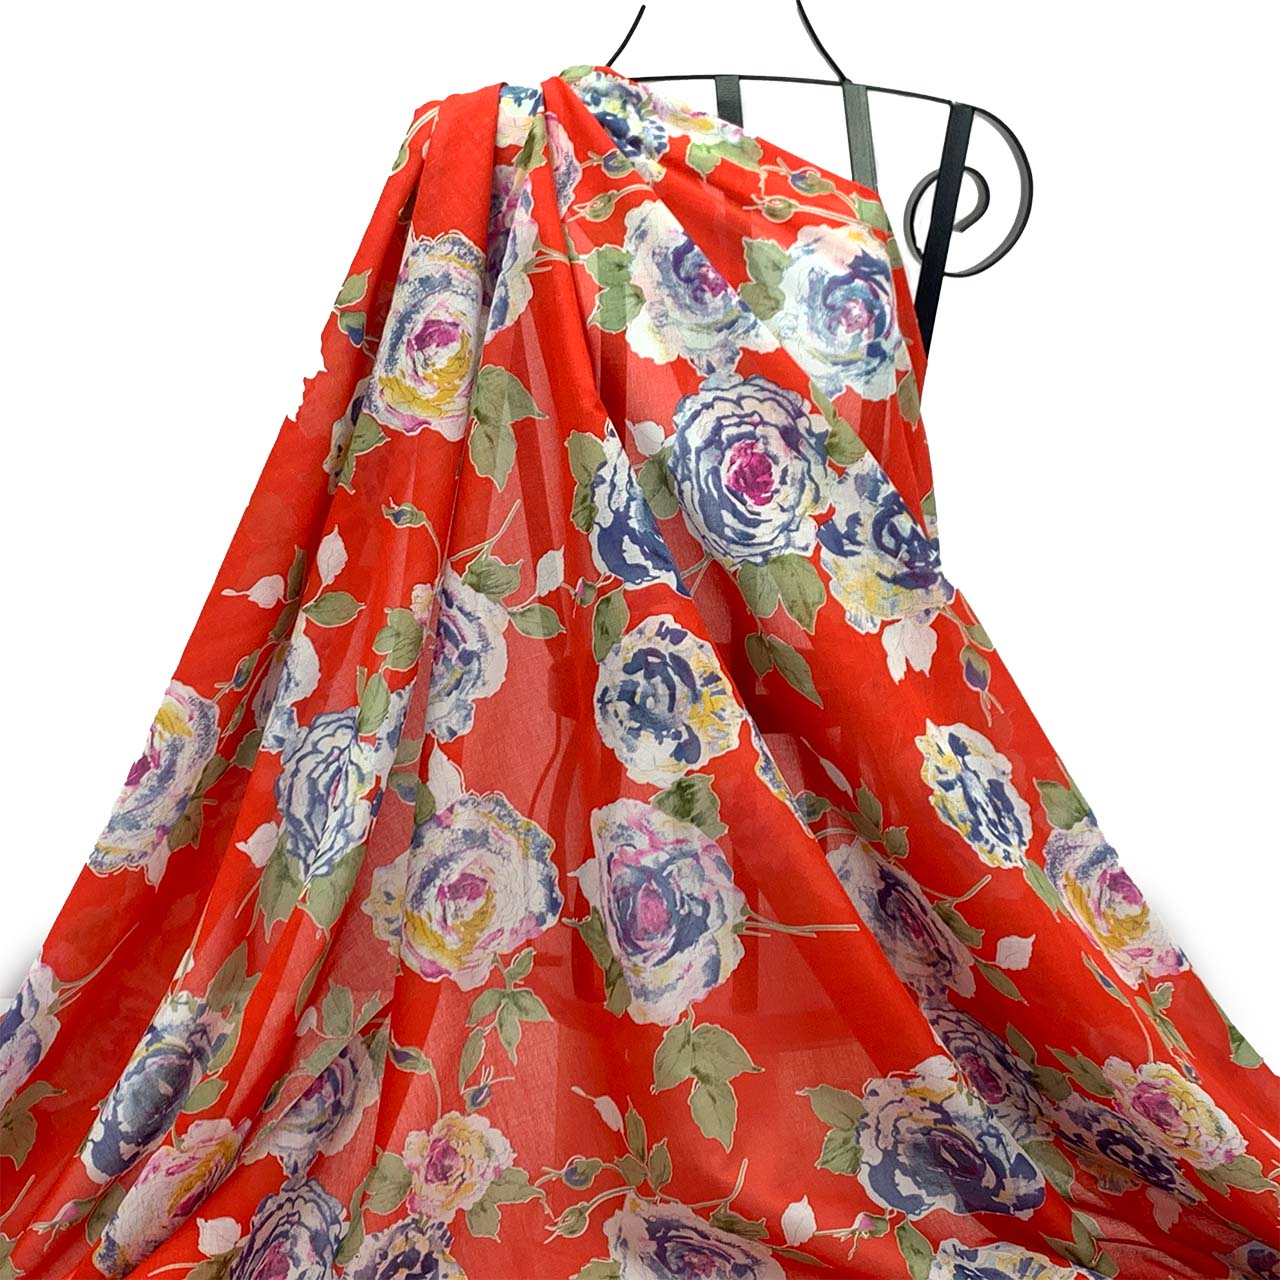 Cotton Voile | Red Rose Print